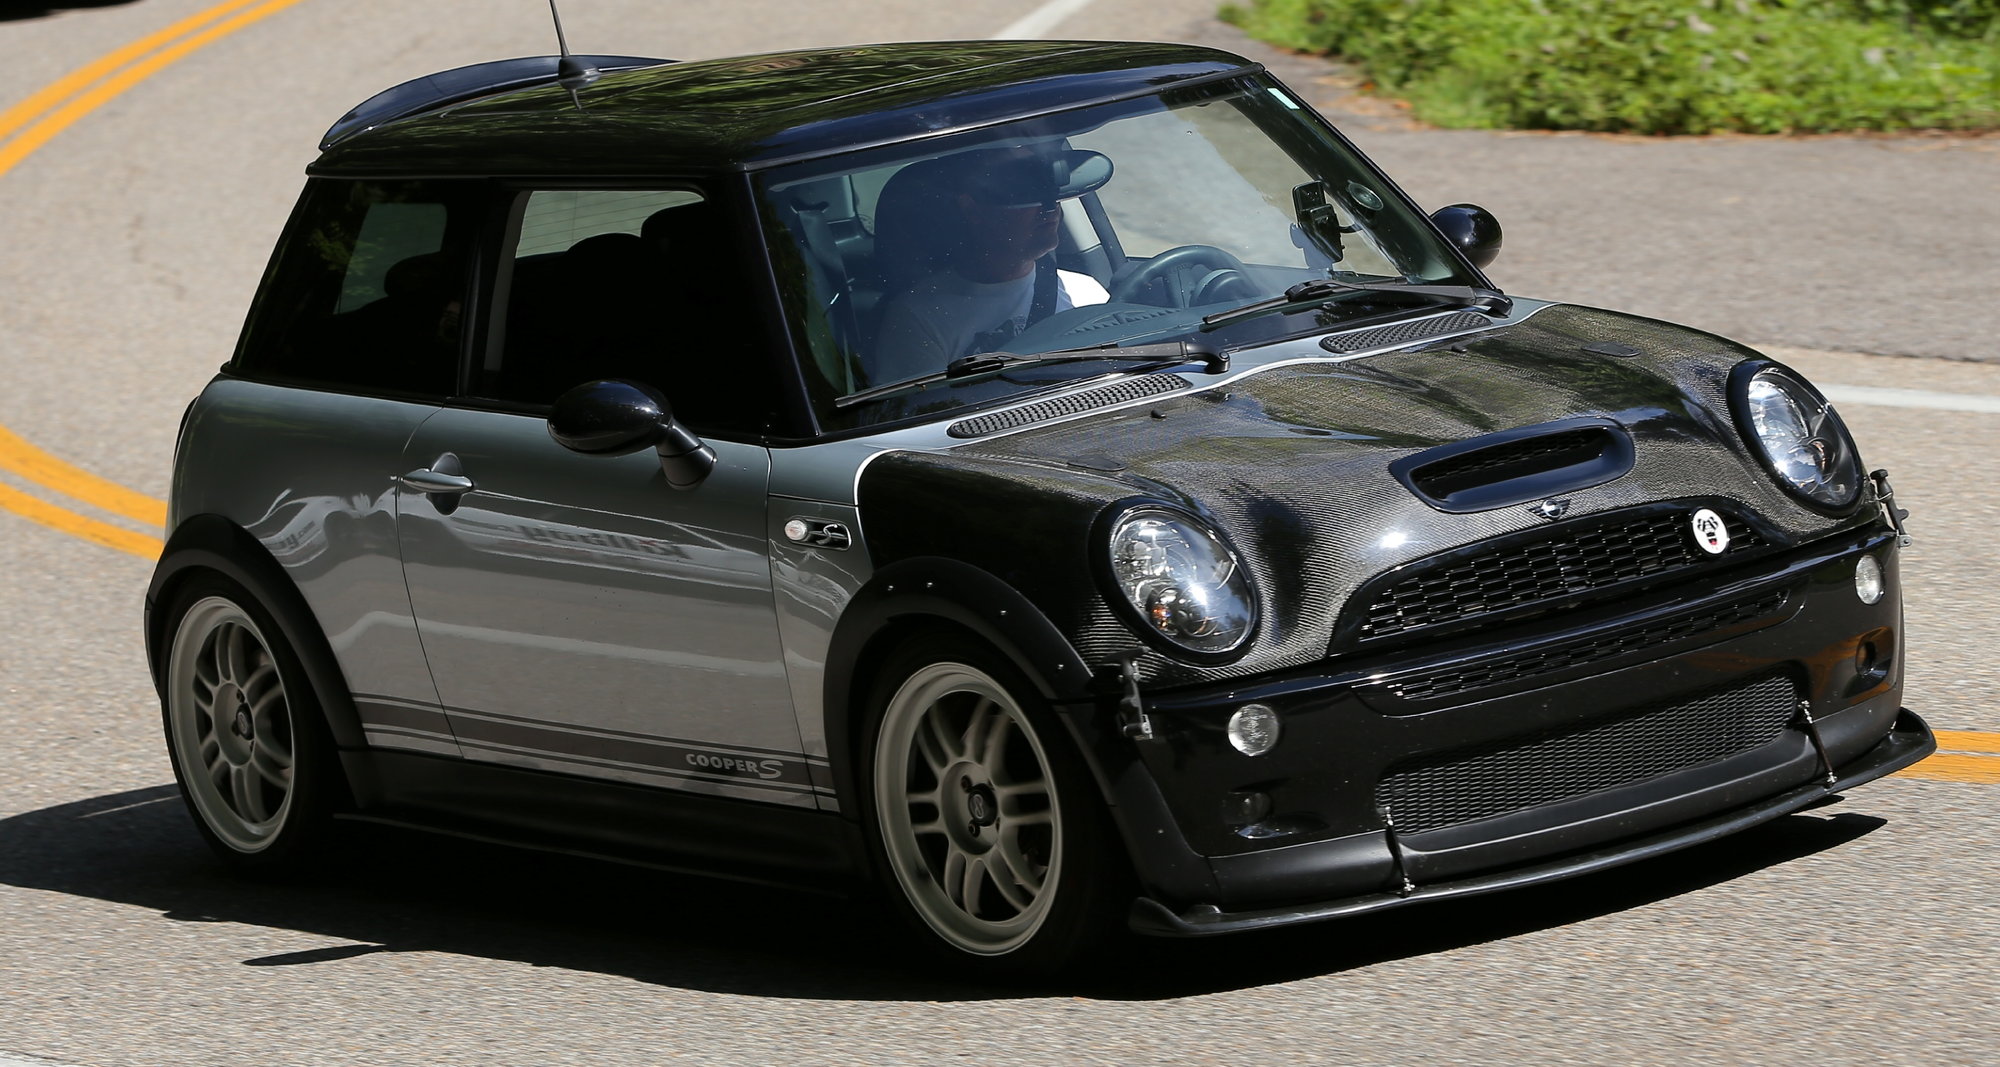 2006 R53 Cooper S HB for Sale - Highly Modified - $9,500 - North American  Motoring